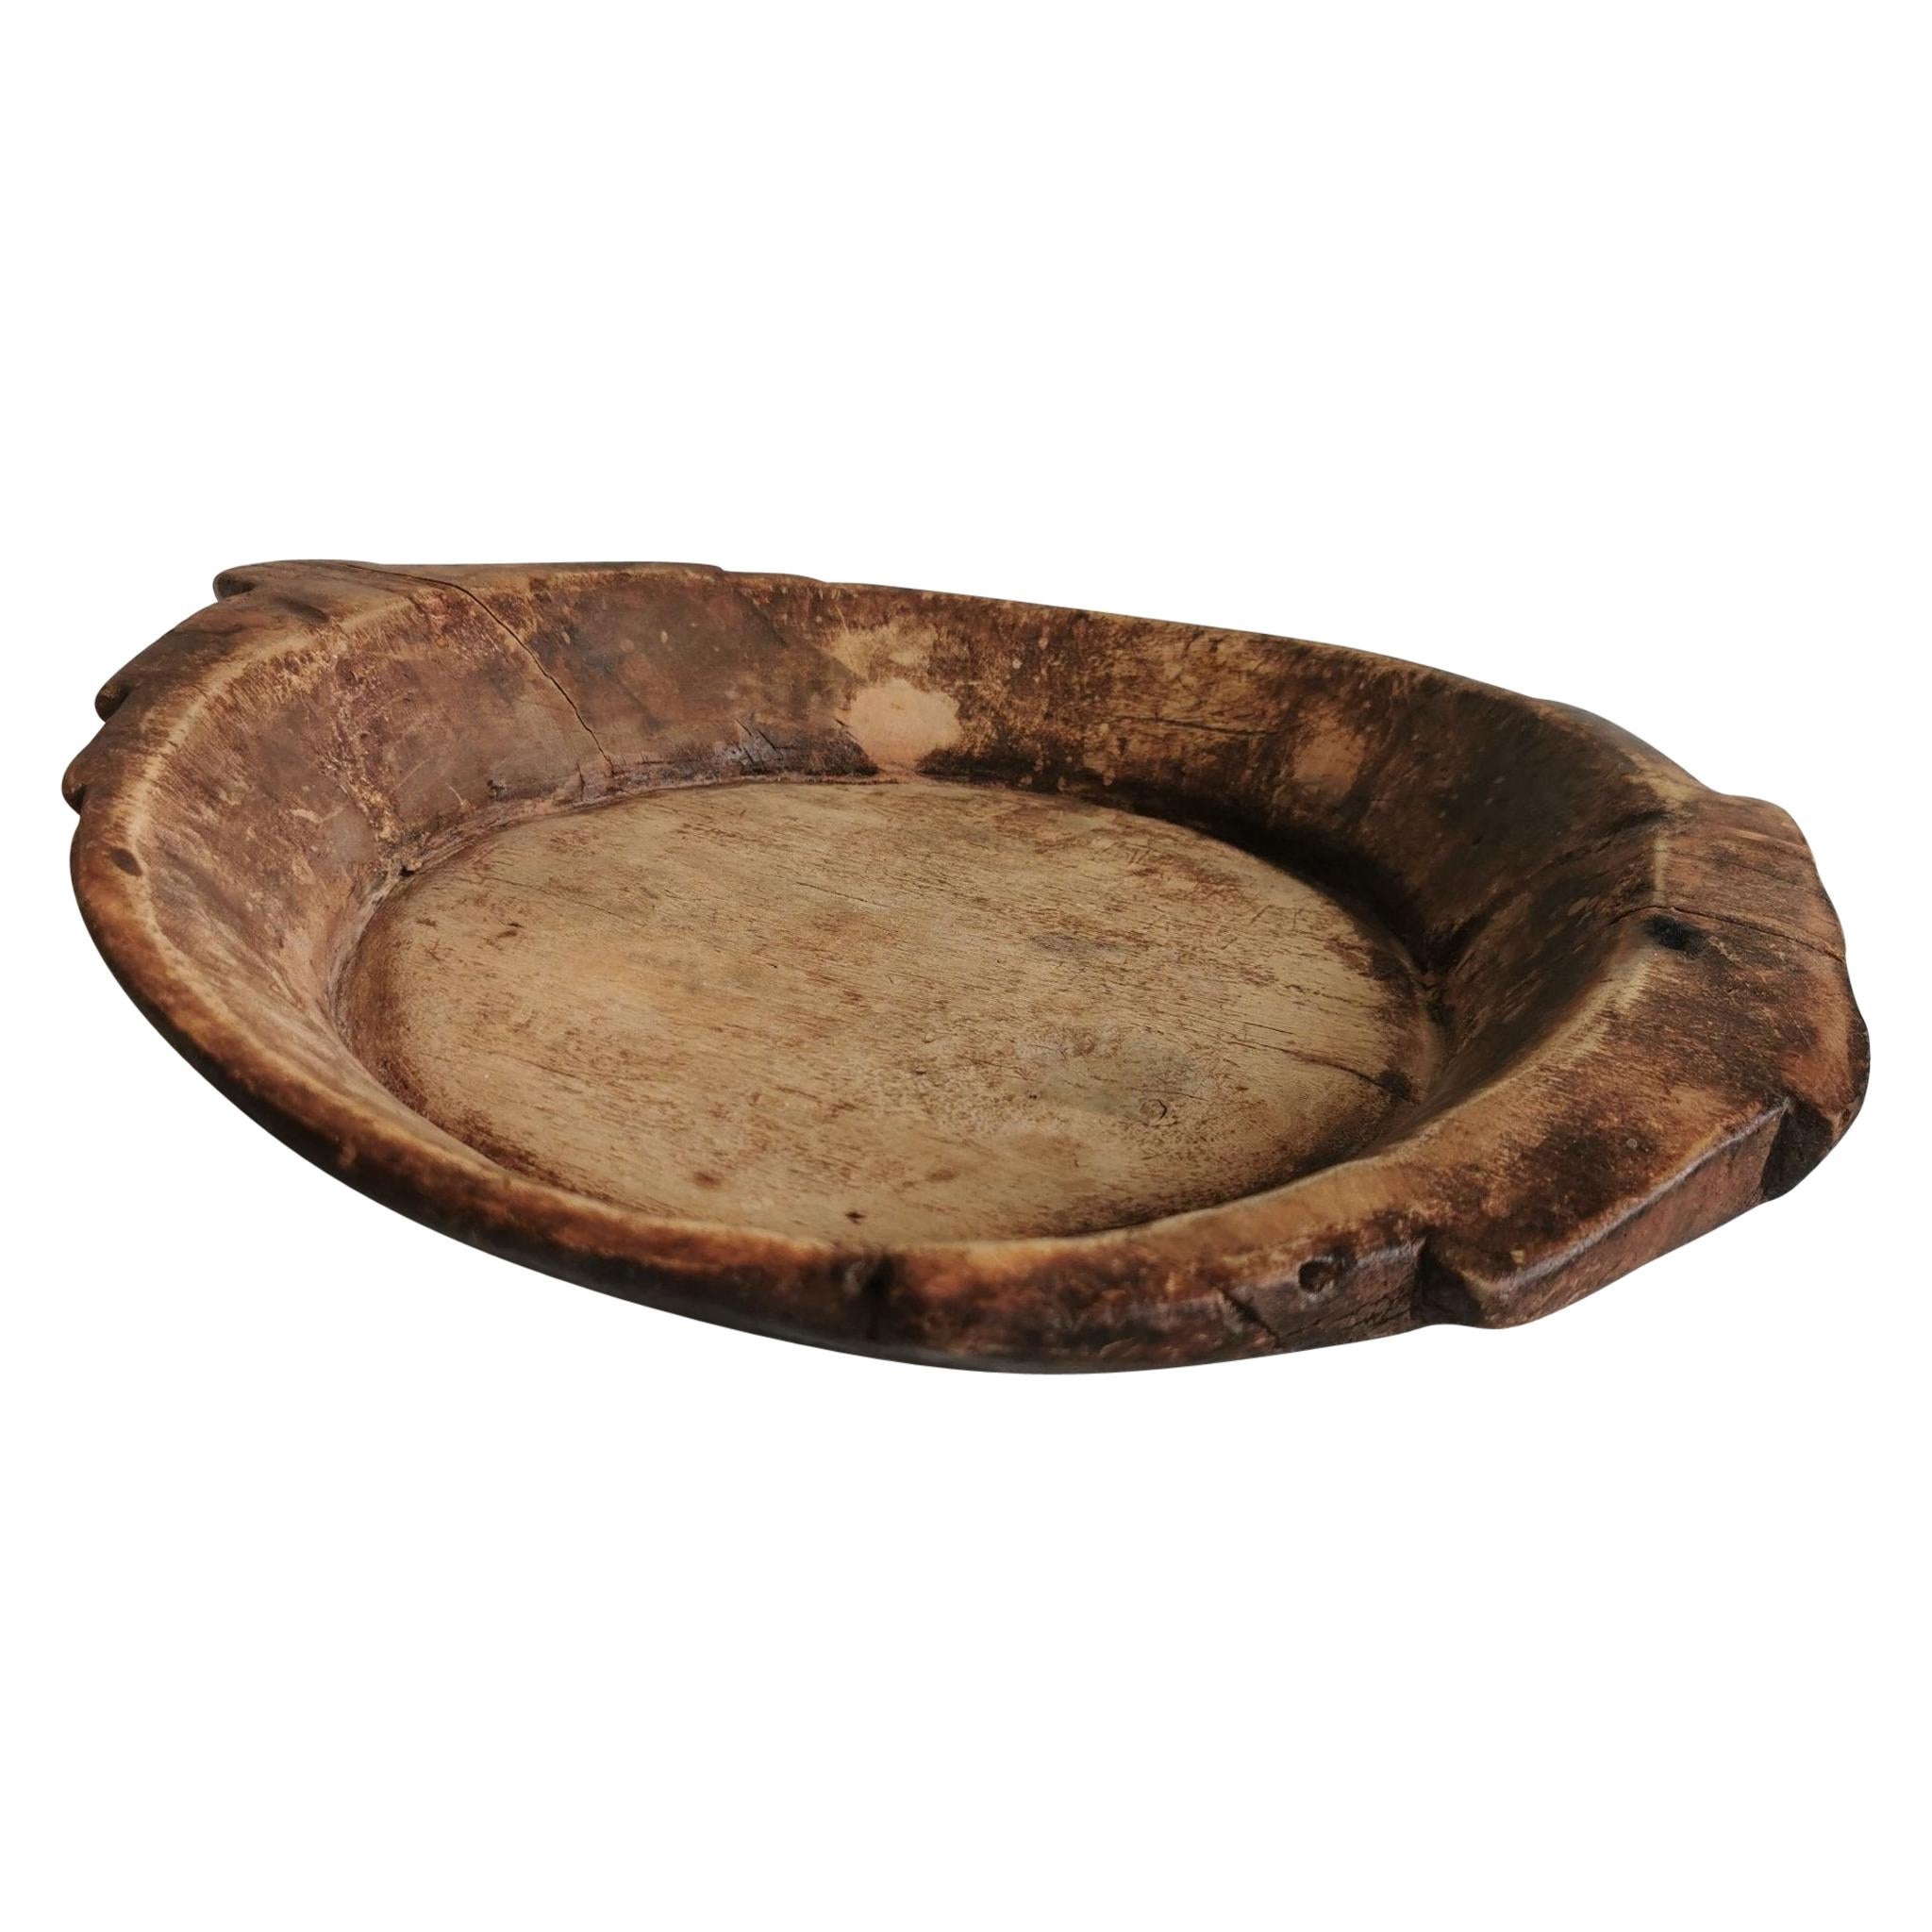 Swedish Wooden Bowl in a Primitive and Wabi Sabi Style, 1800s